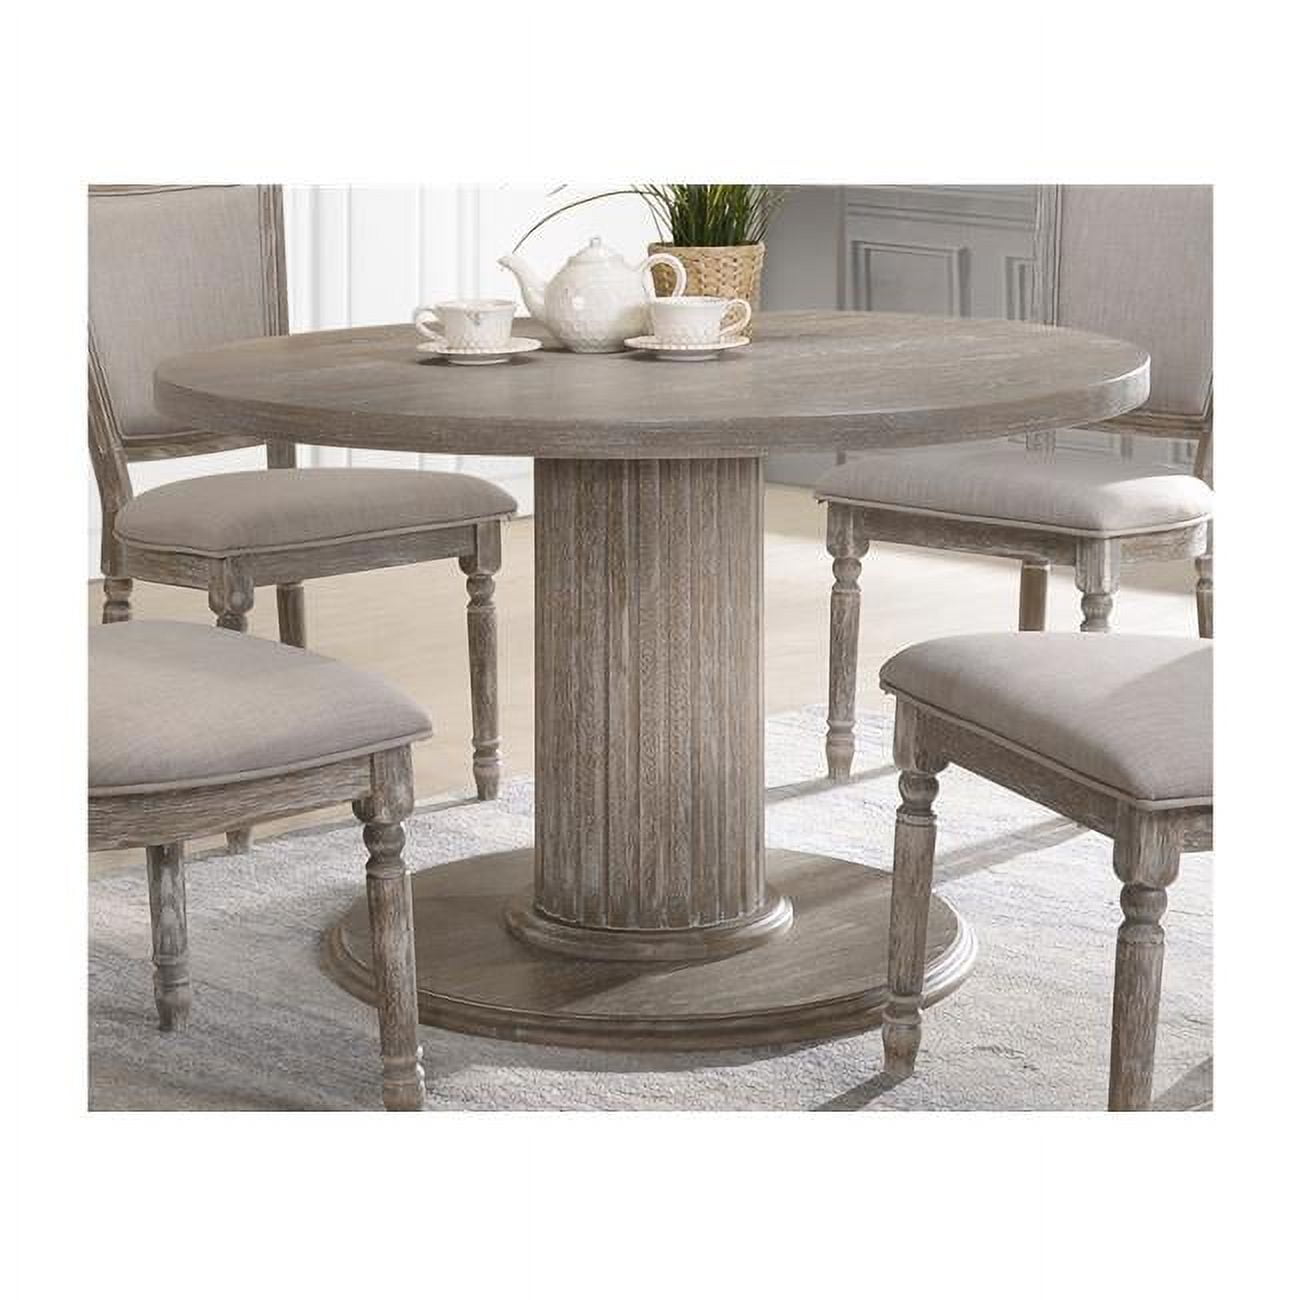 Picture of Best Master Furniture Jessica Dinette Table Jessica Vintage Grey Round Dinette Table